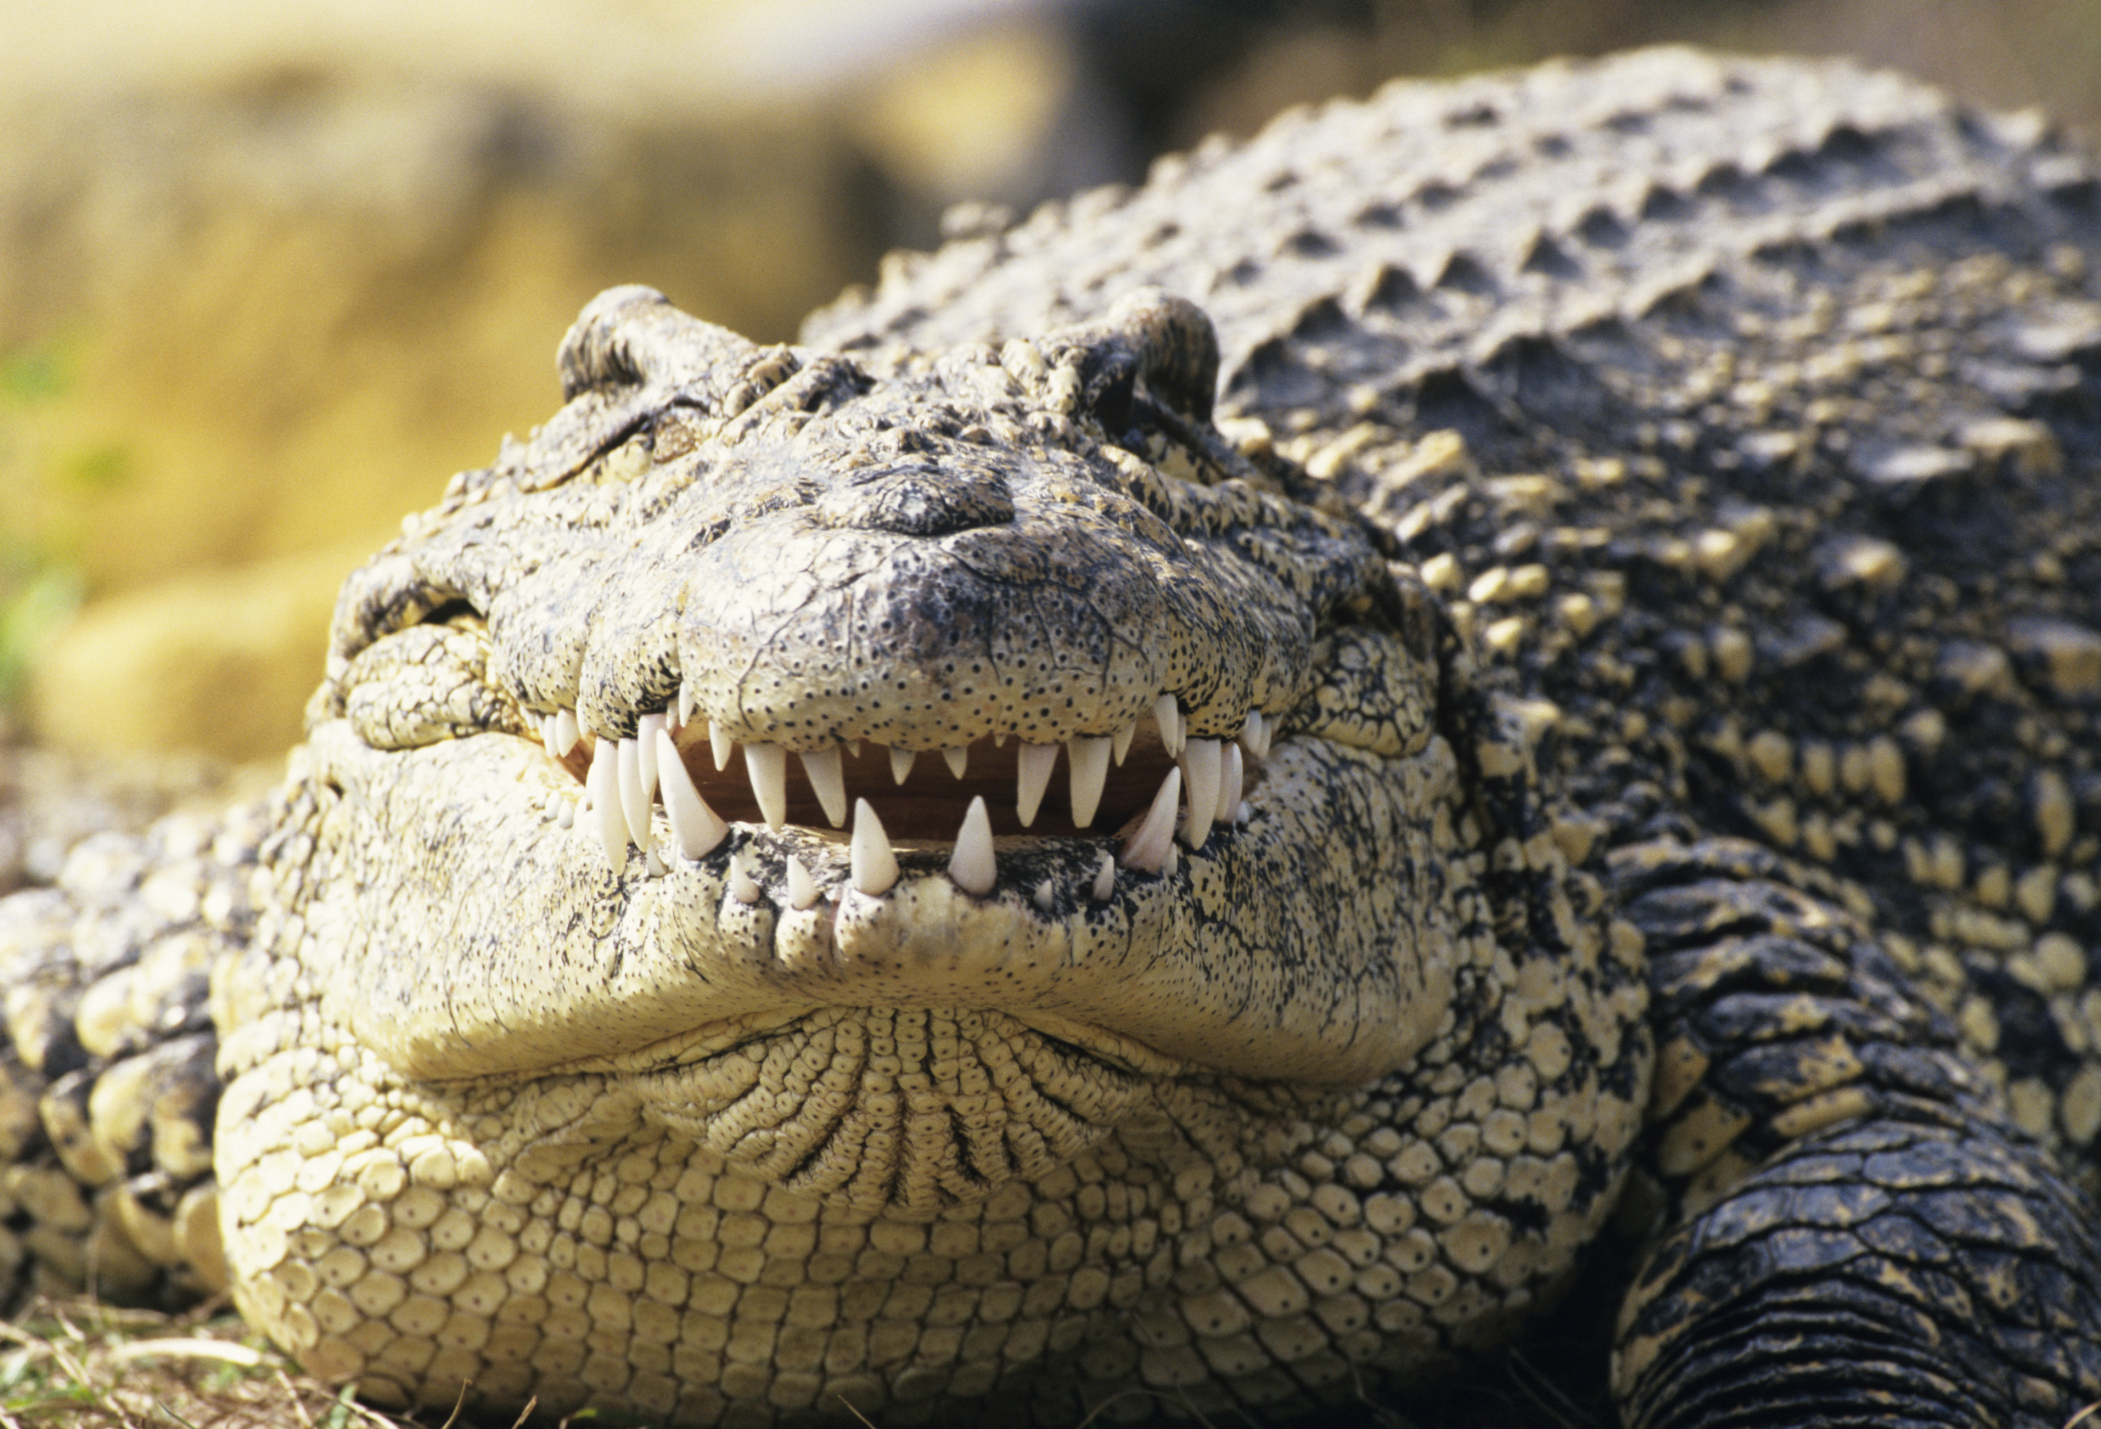 Do crocodiles really shed tears? | What can I learn today?